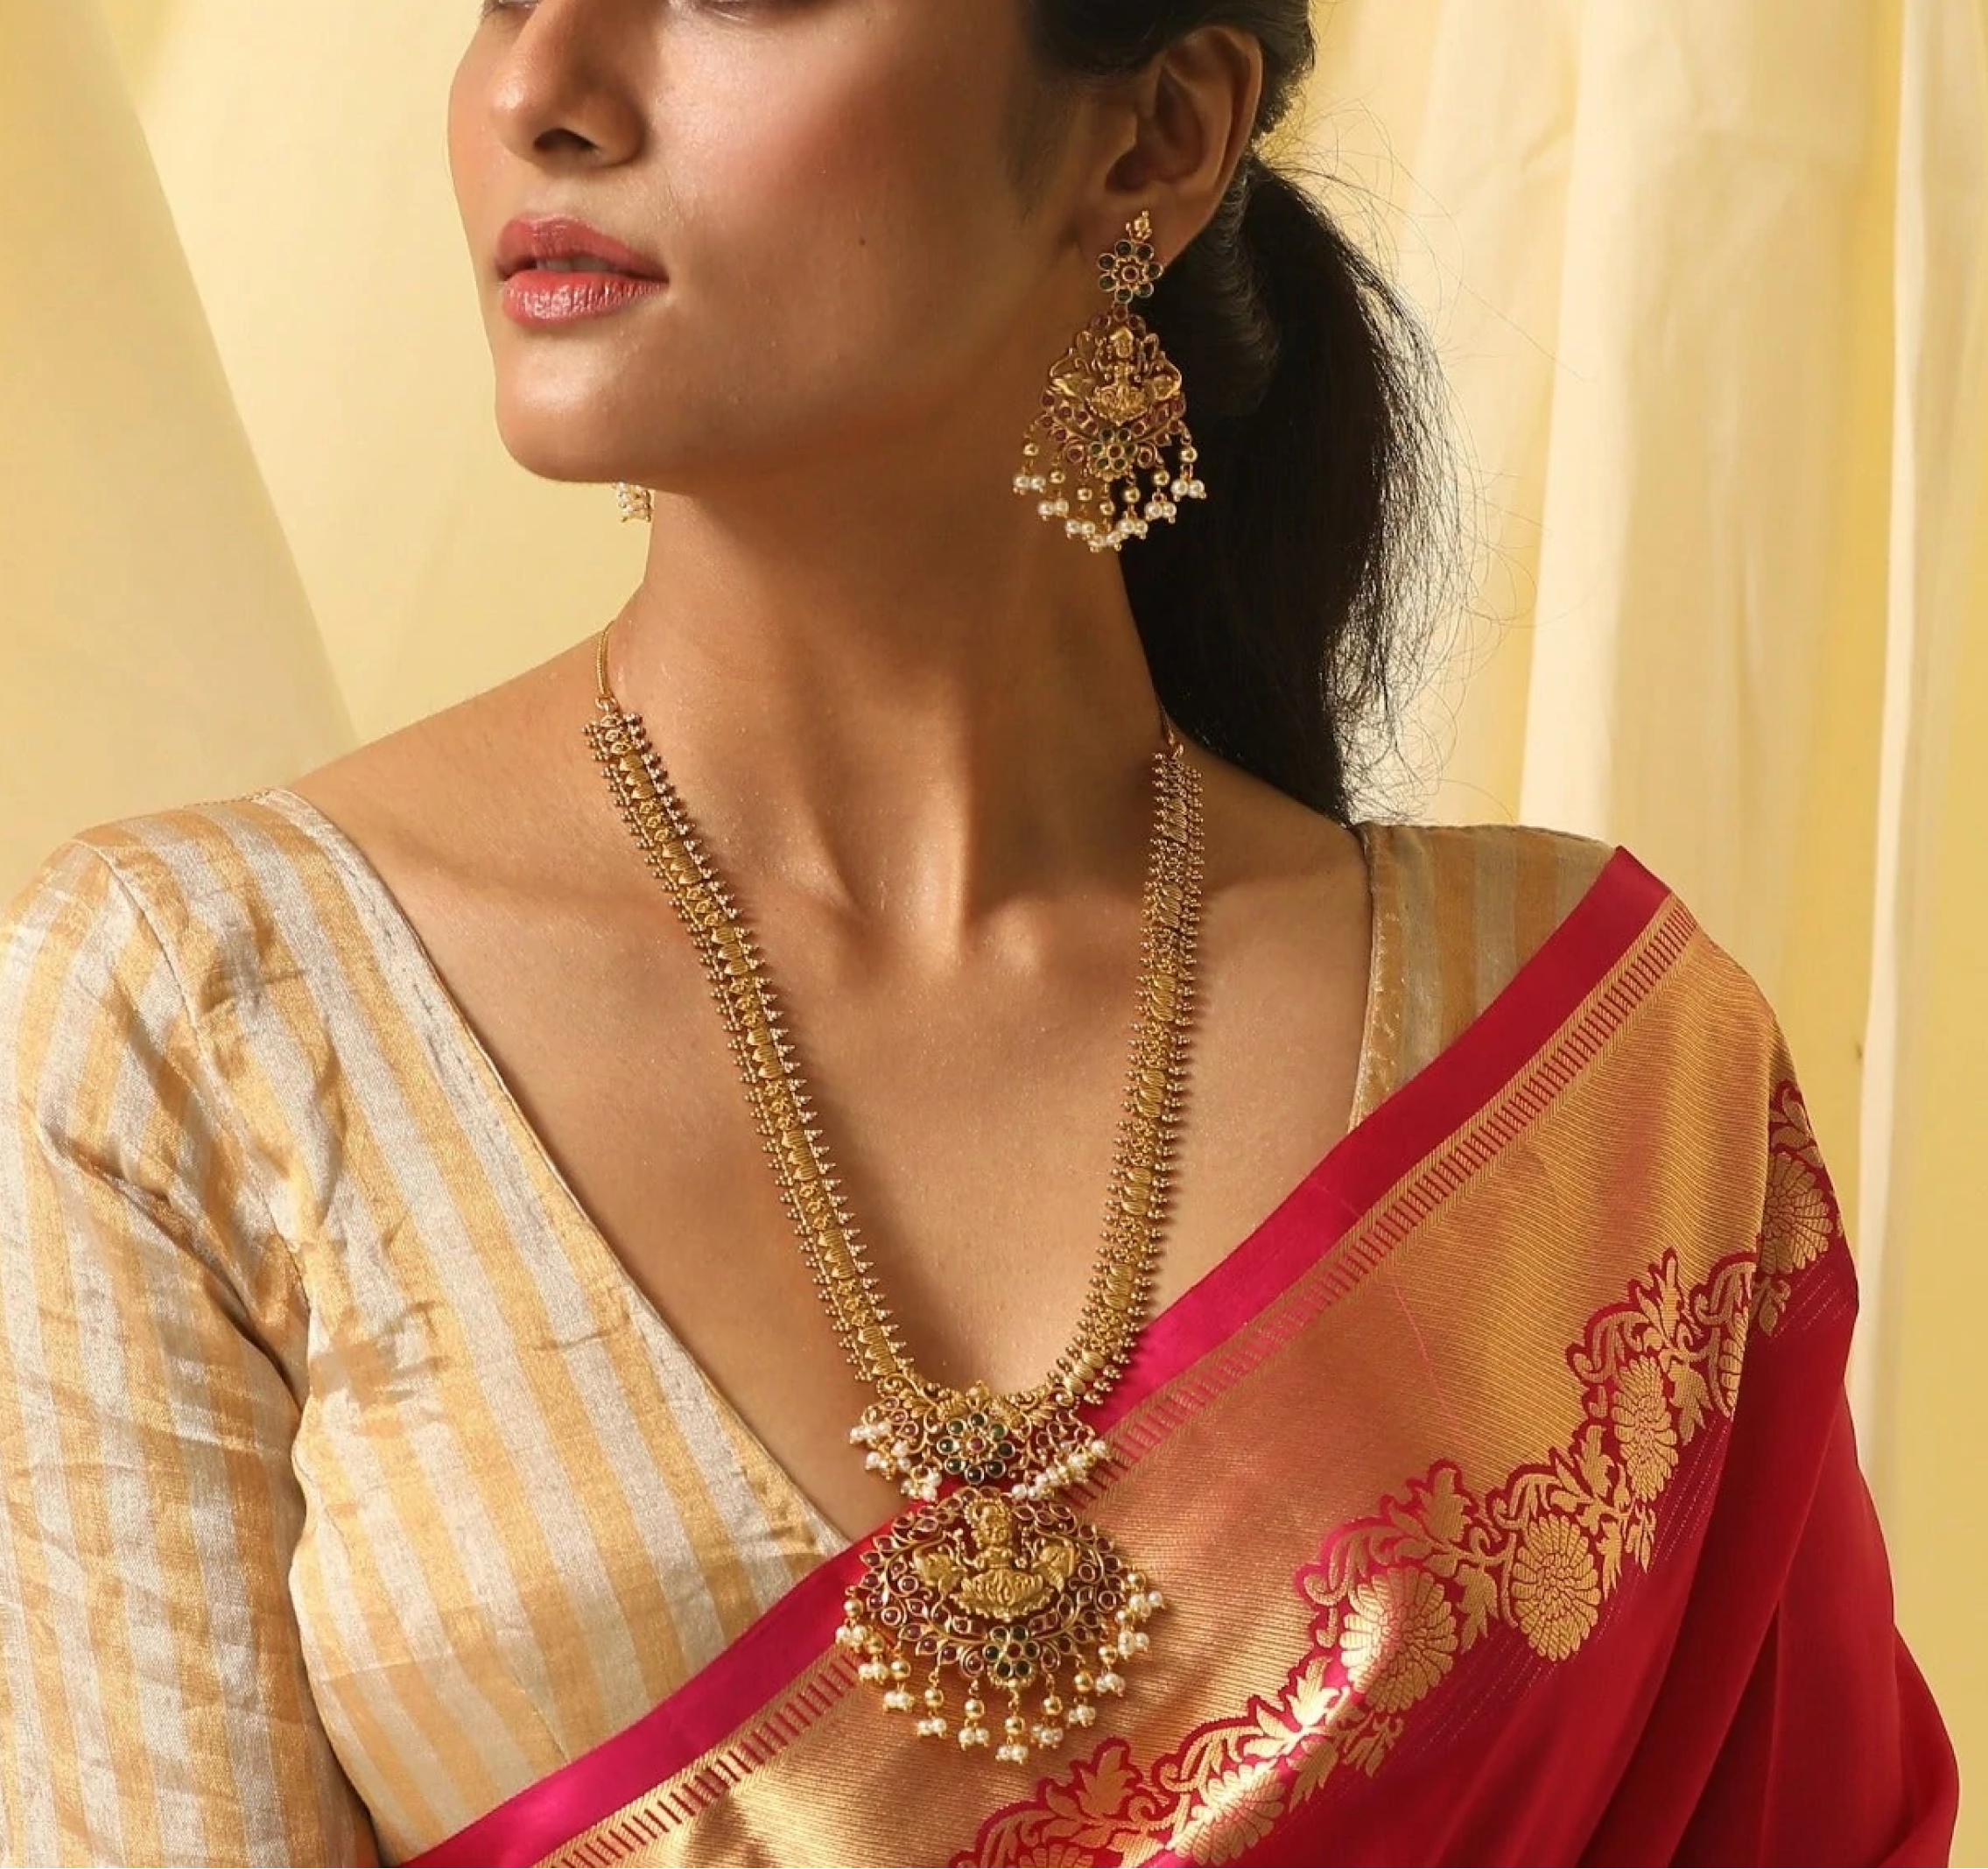 model wearing a matching long gold necklace and earrings with pearls